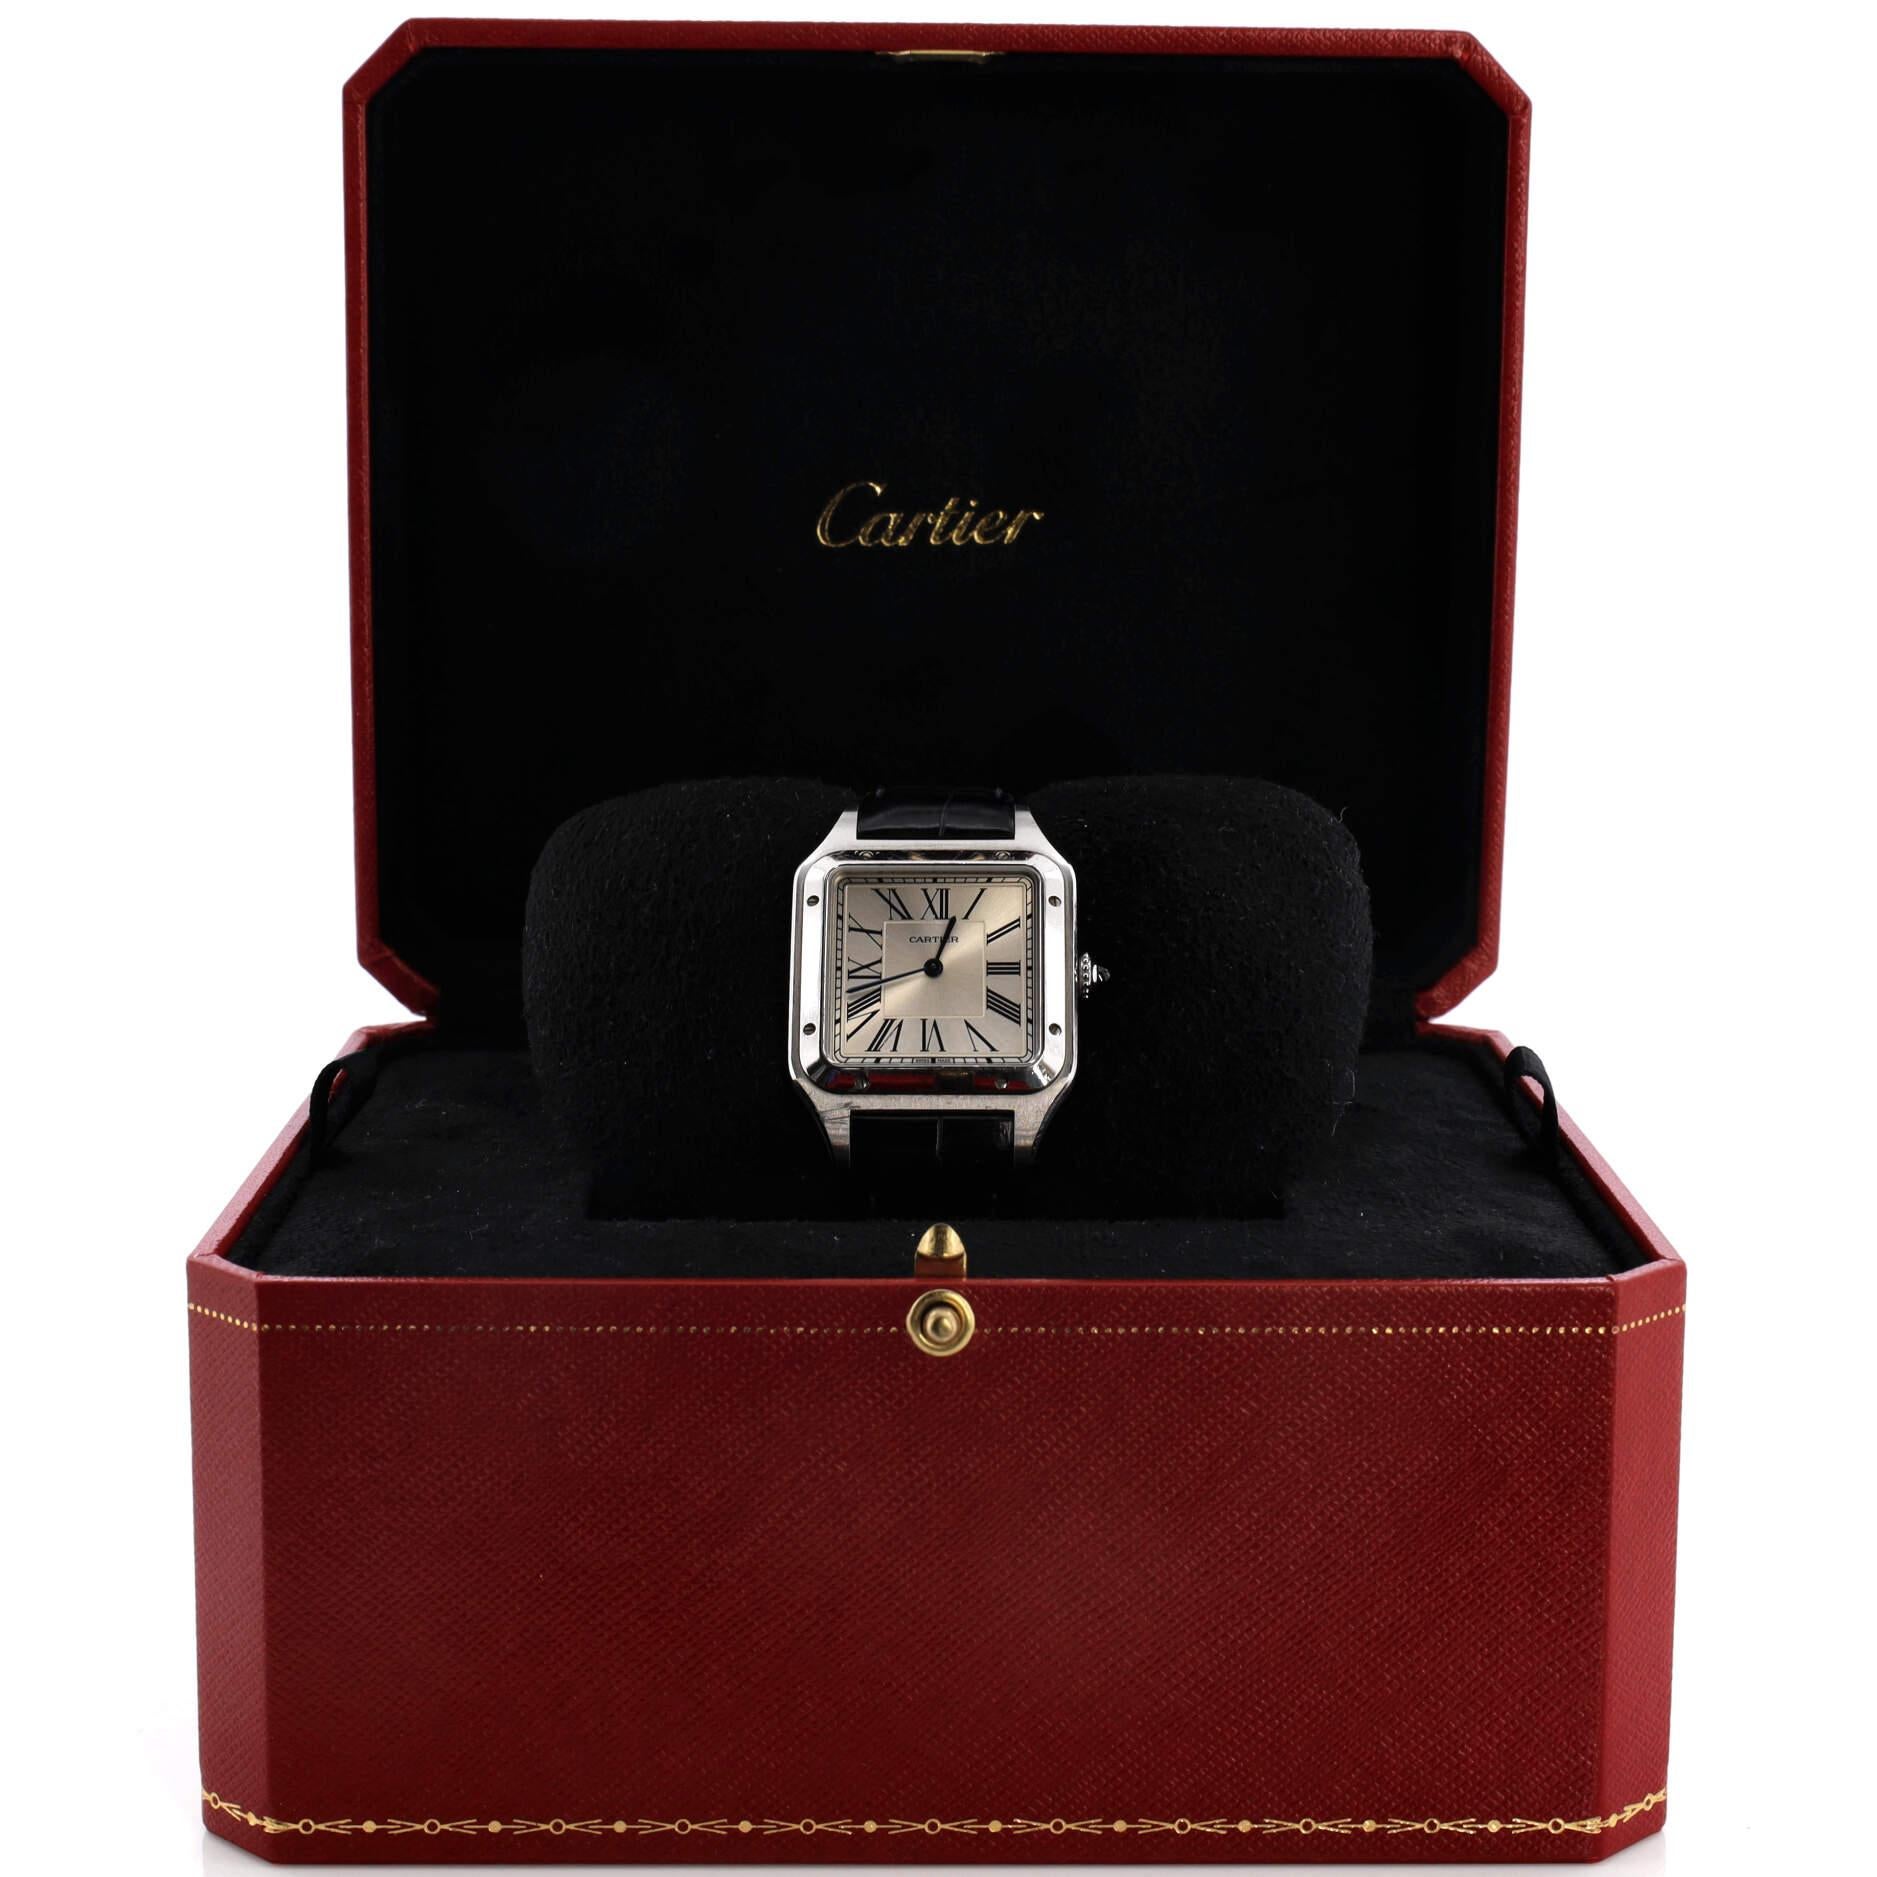 This item can only be shipped within the United States.

Condition: Very good. Heavy scratches, dings, and wear throughout. Wear, dings, and scratches on case and strap.
Accessories: Box
Measurements: Case Size/Width: 31mm, Watch Height: 8mm, Band